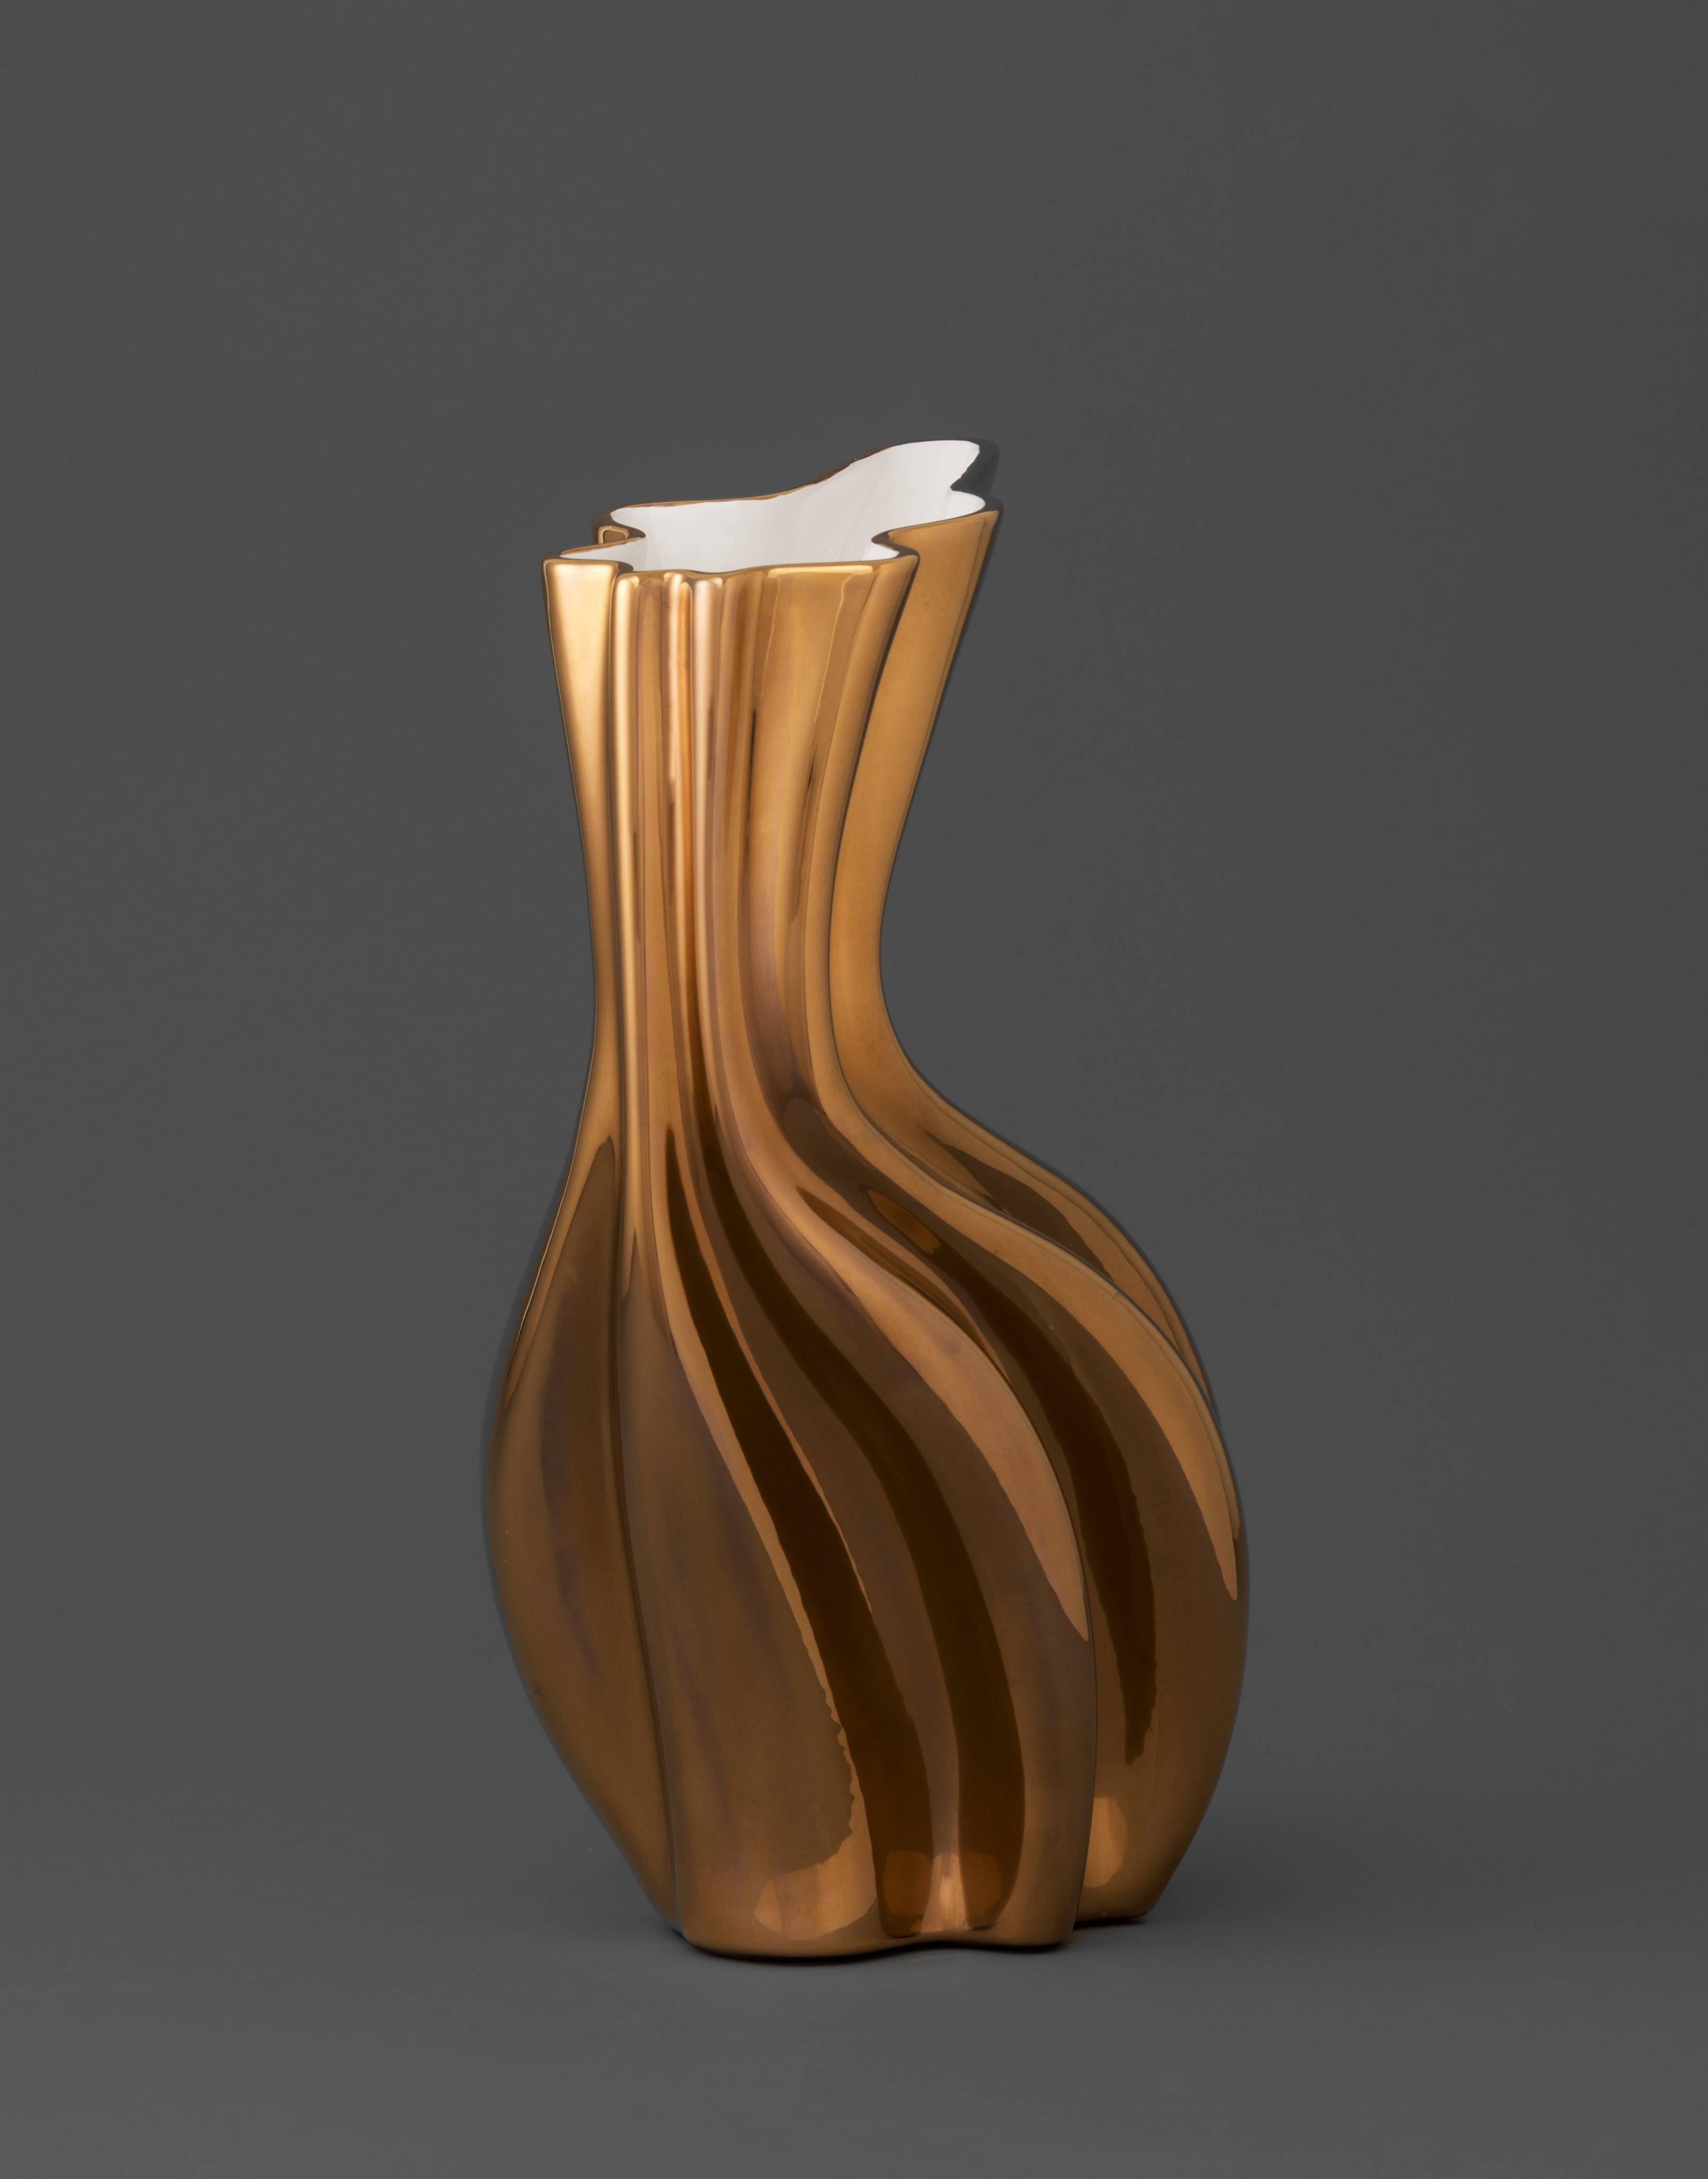 If you are looking for a vase that is more than an accessory, becoming a true piece of art in your place, then you will definitely love this Sinuo Gold vase.

More than a simple vase, this organic shaped vase is a perfect choice for turning any